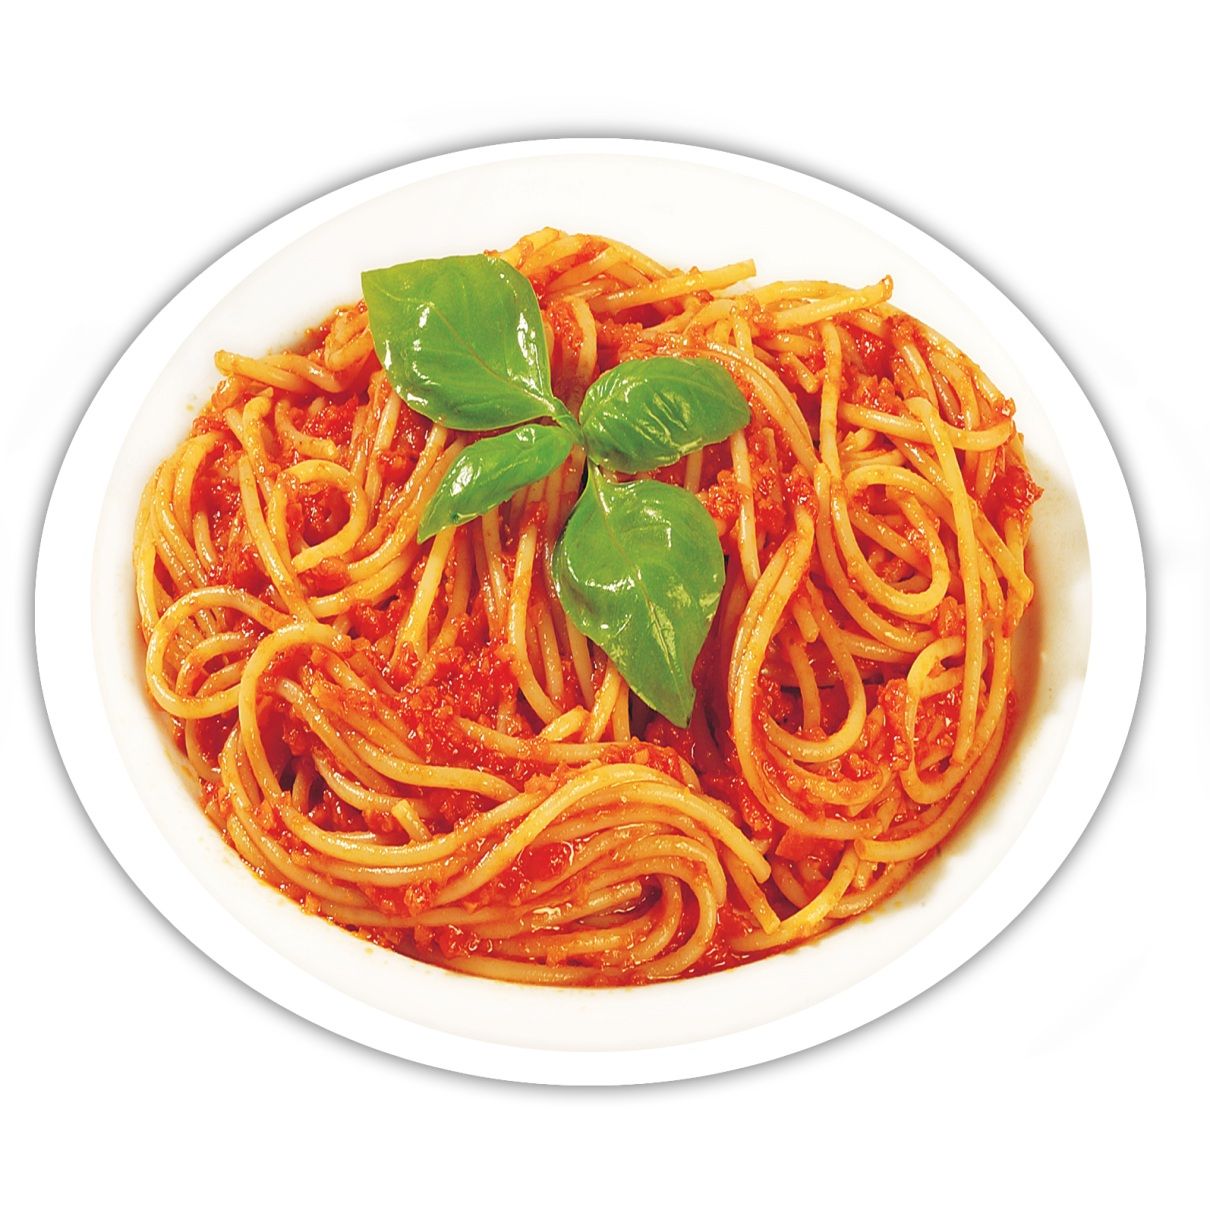 /assets/contentimages/SPAGHETTI_POMODORO.jpg